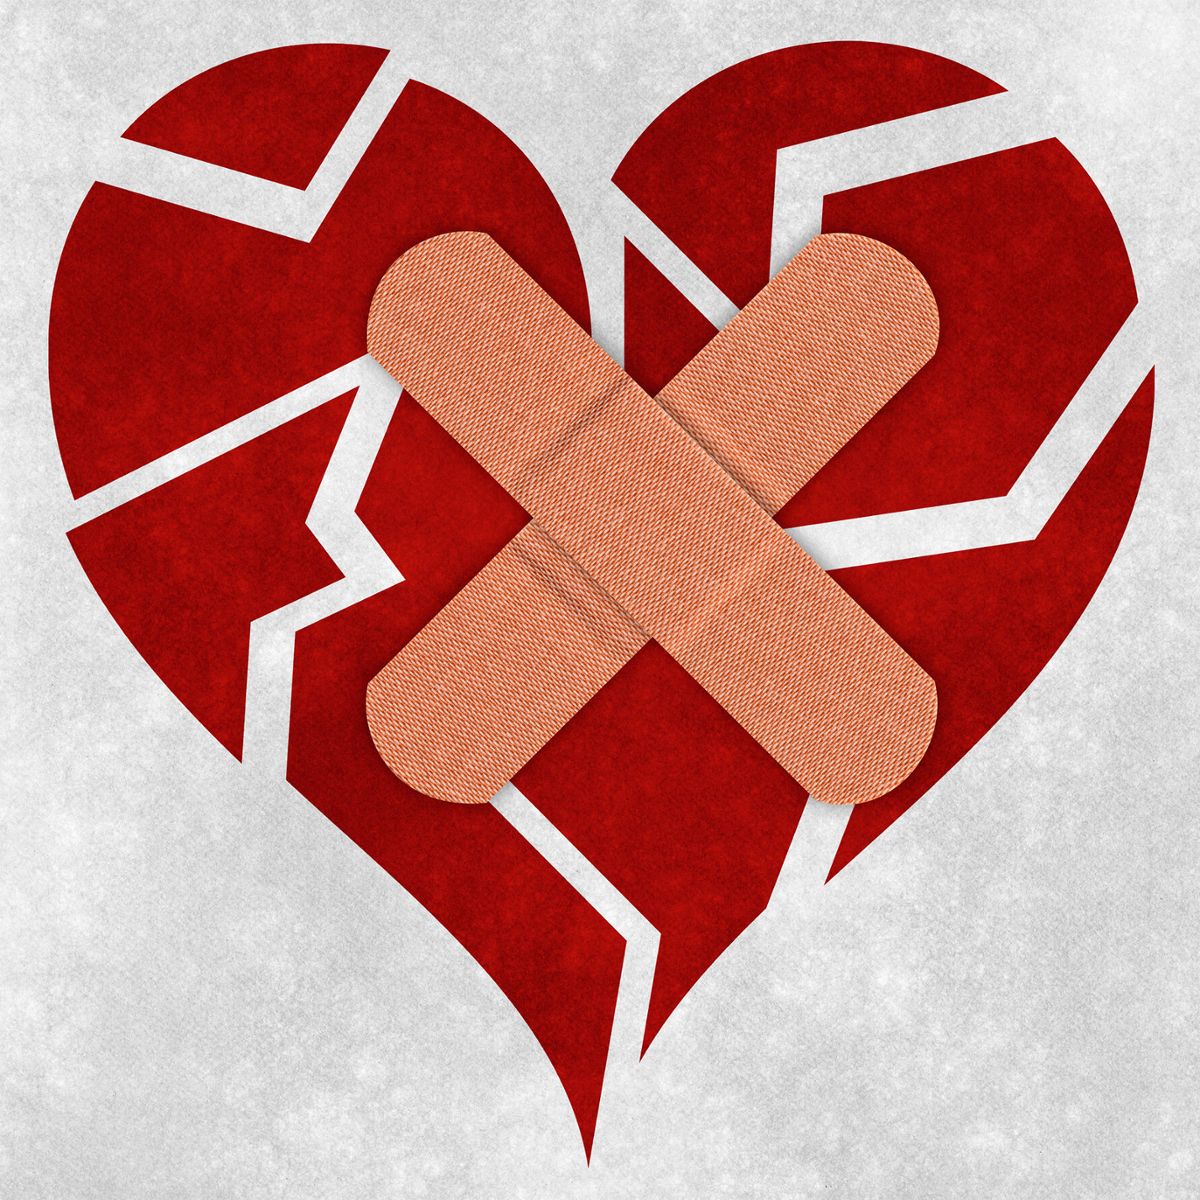 An illustrated broken heart with bandaids over it